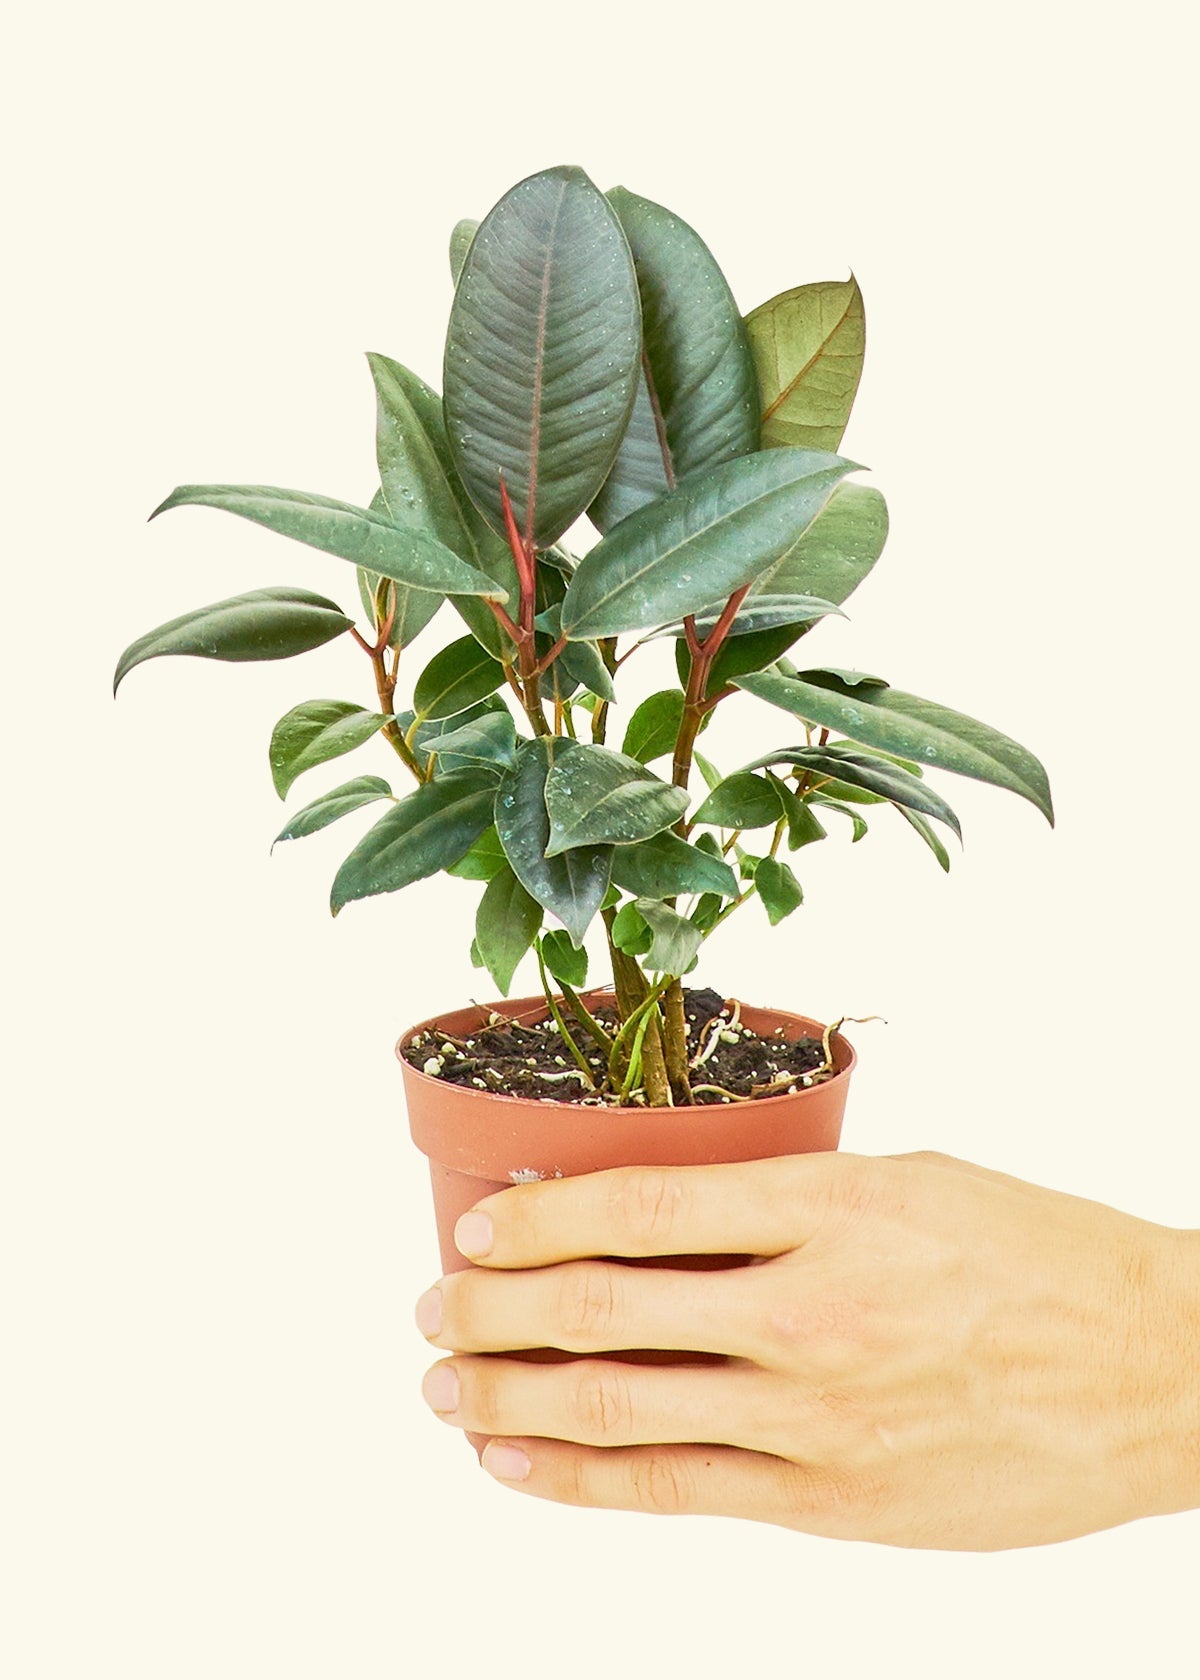 Small Rubber Tree 'burgundy' (Ficus elastica) in a grow pot.